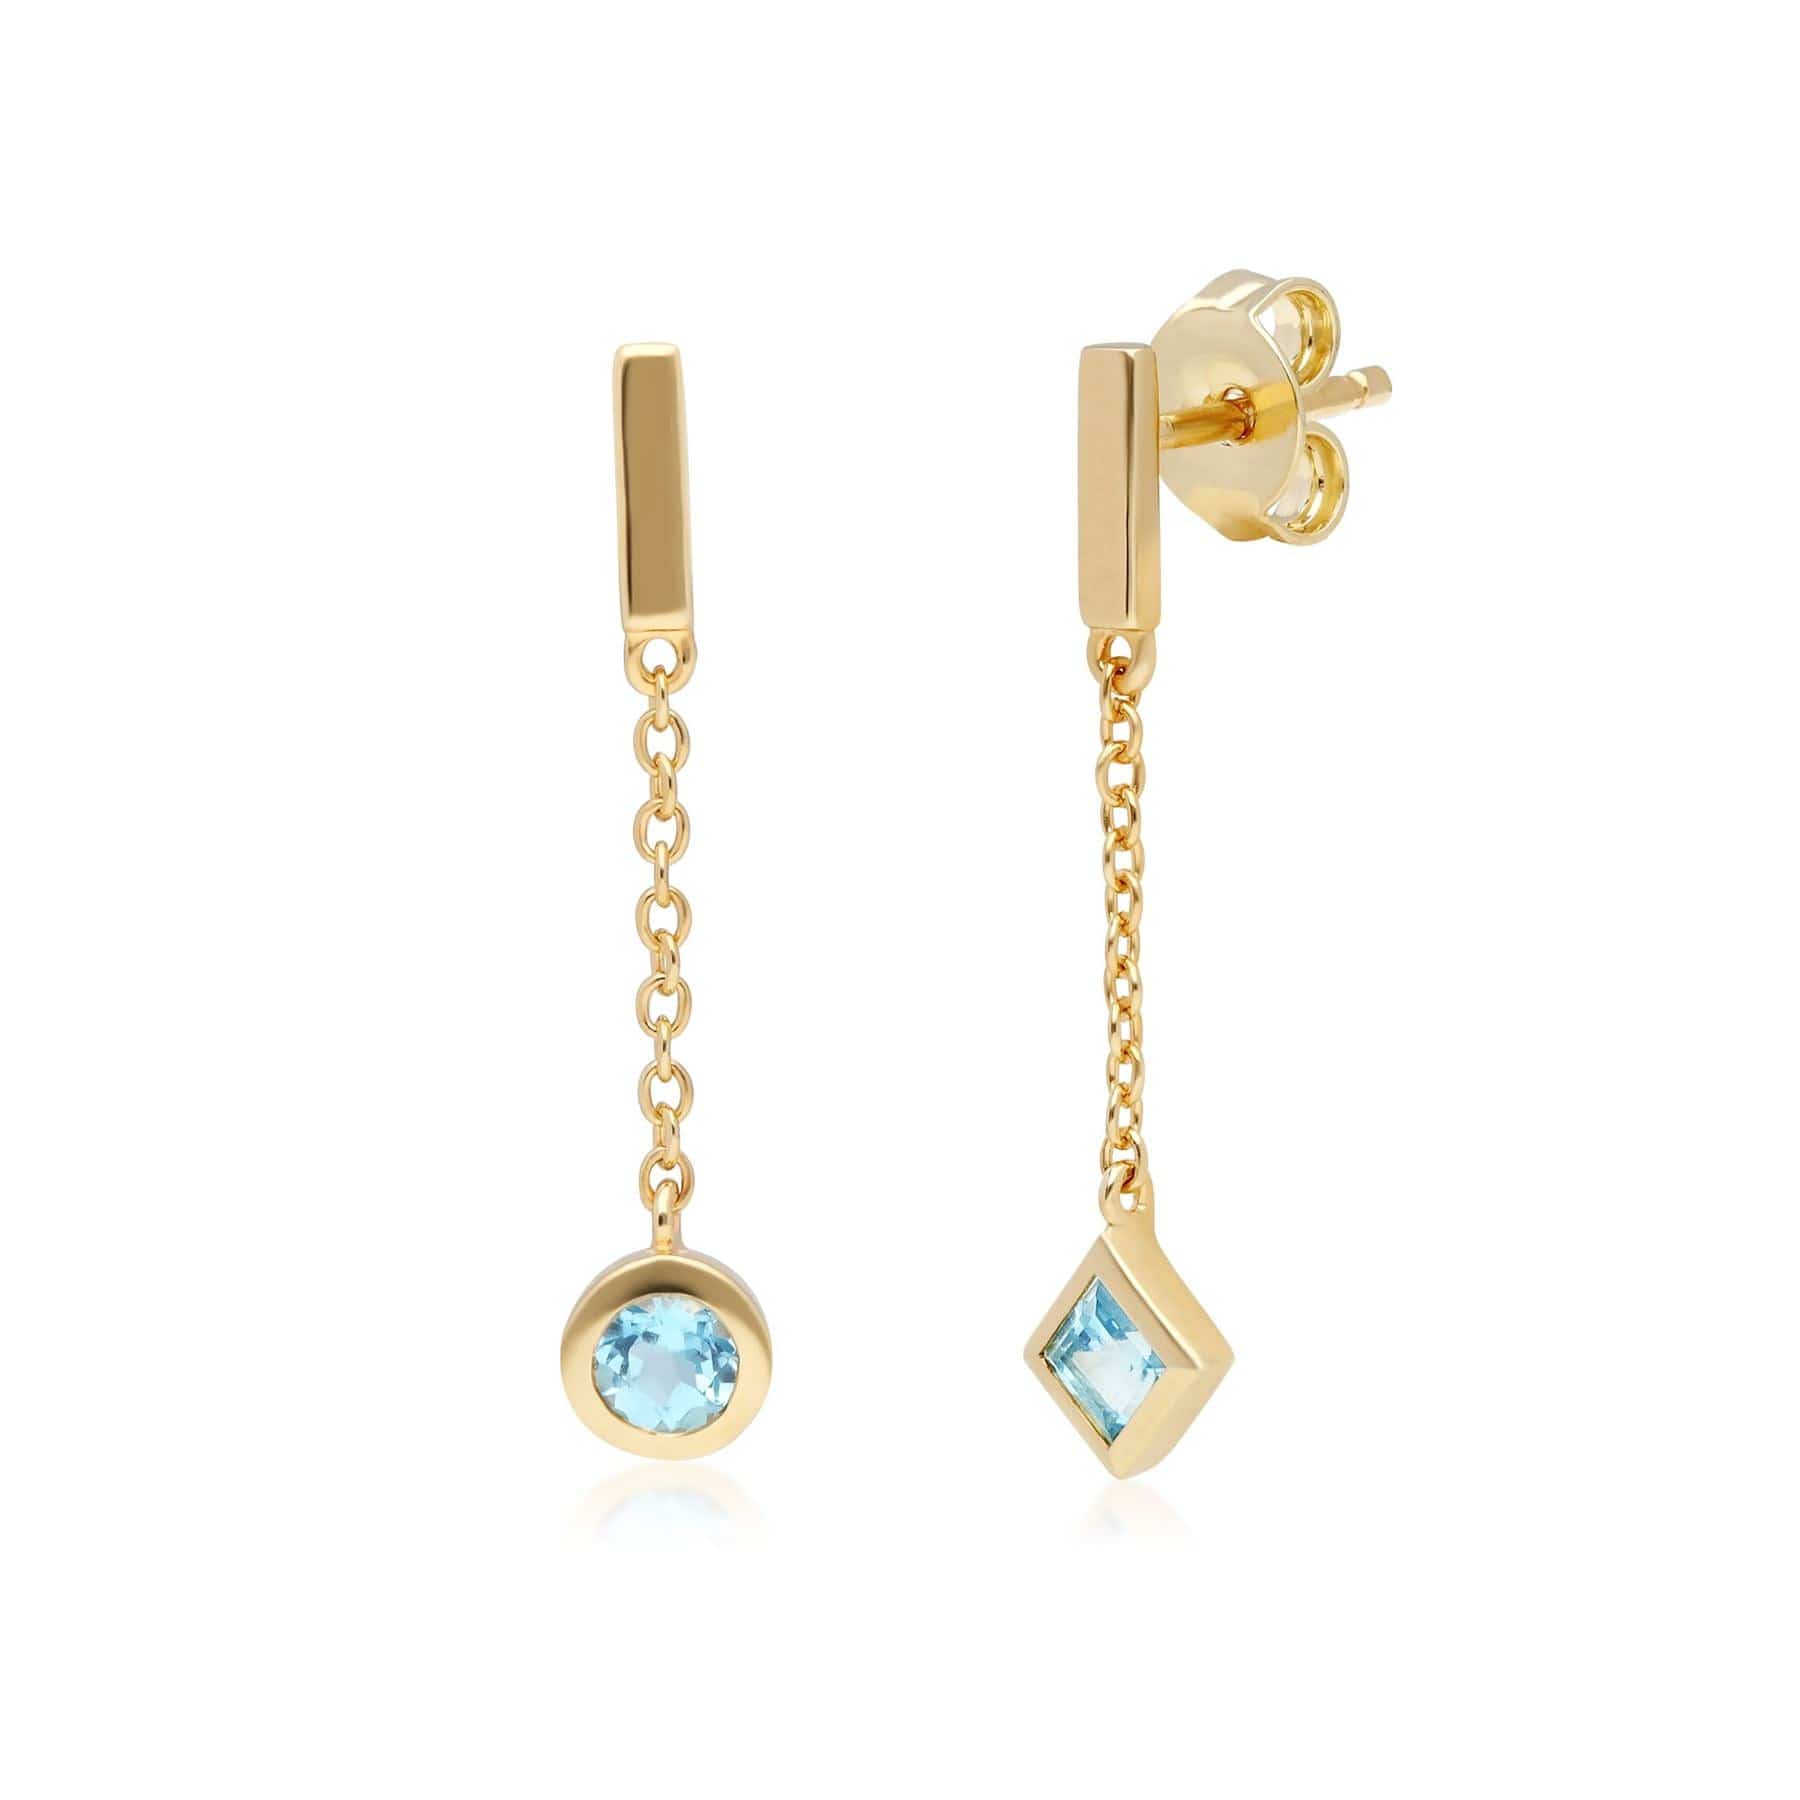 135E1634019 Micro Statement Mismatched Blue Topaz Dangle Earrings in 9ct Gold 4